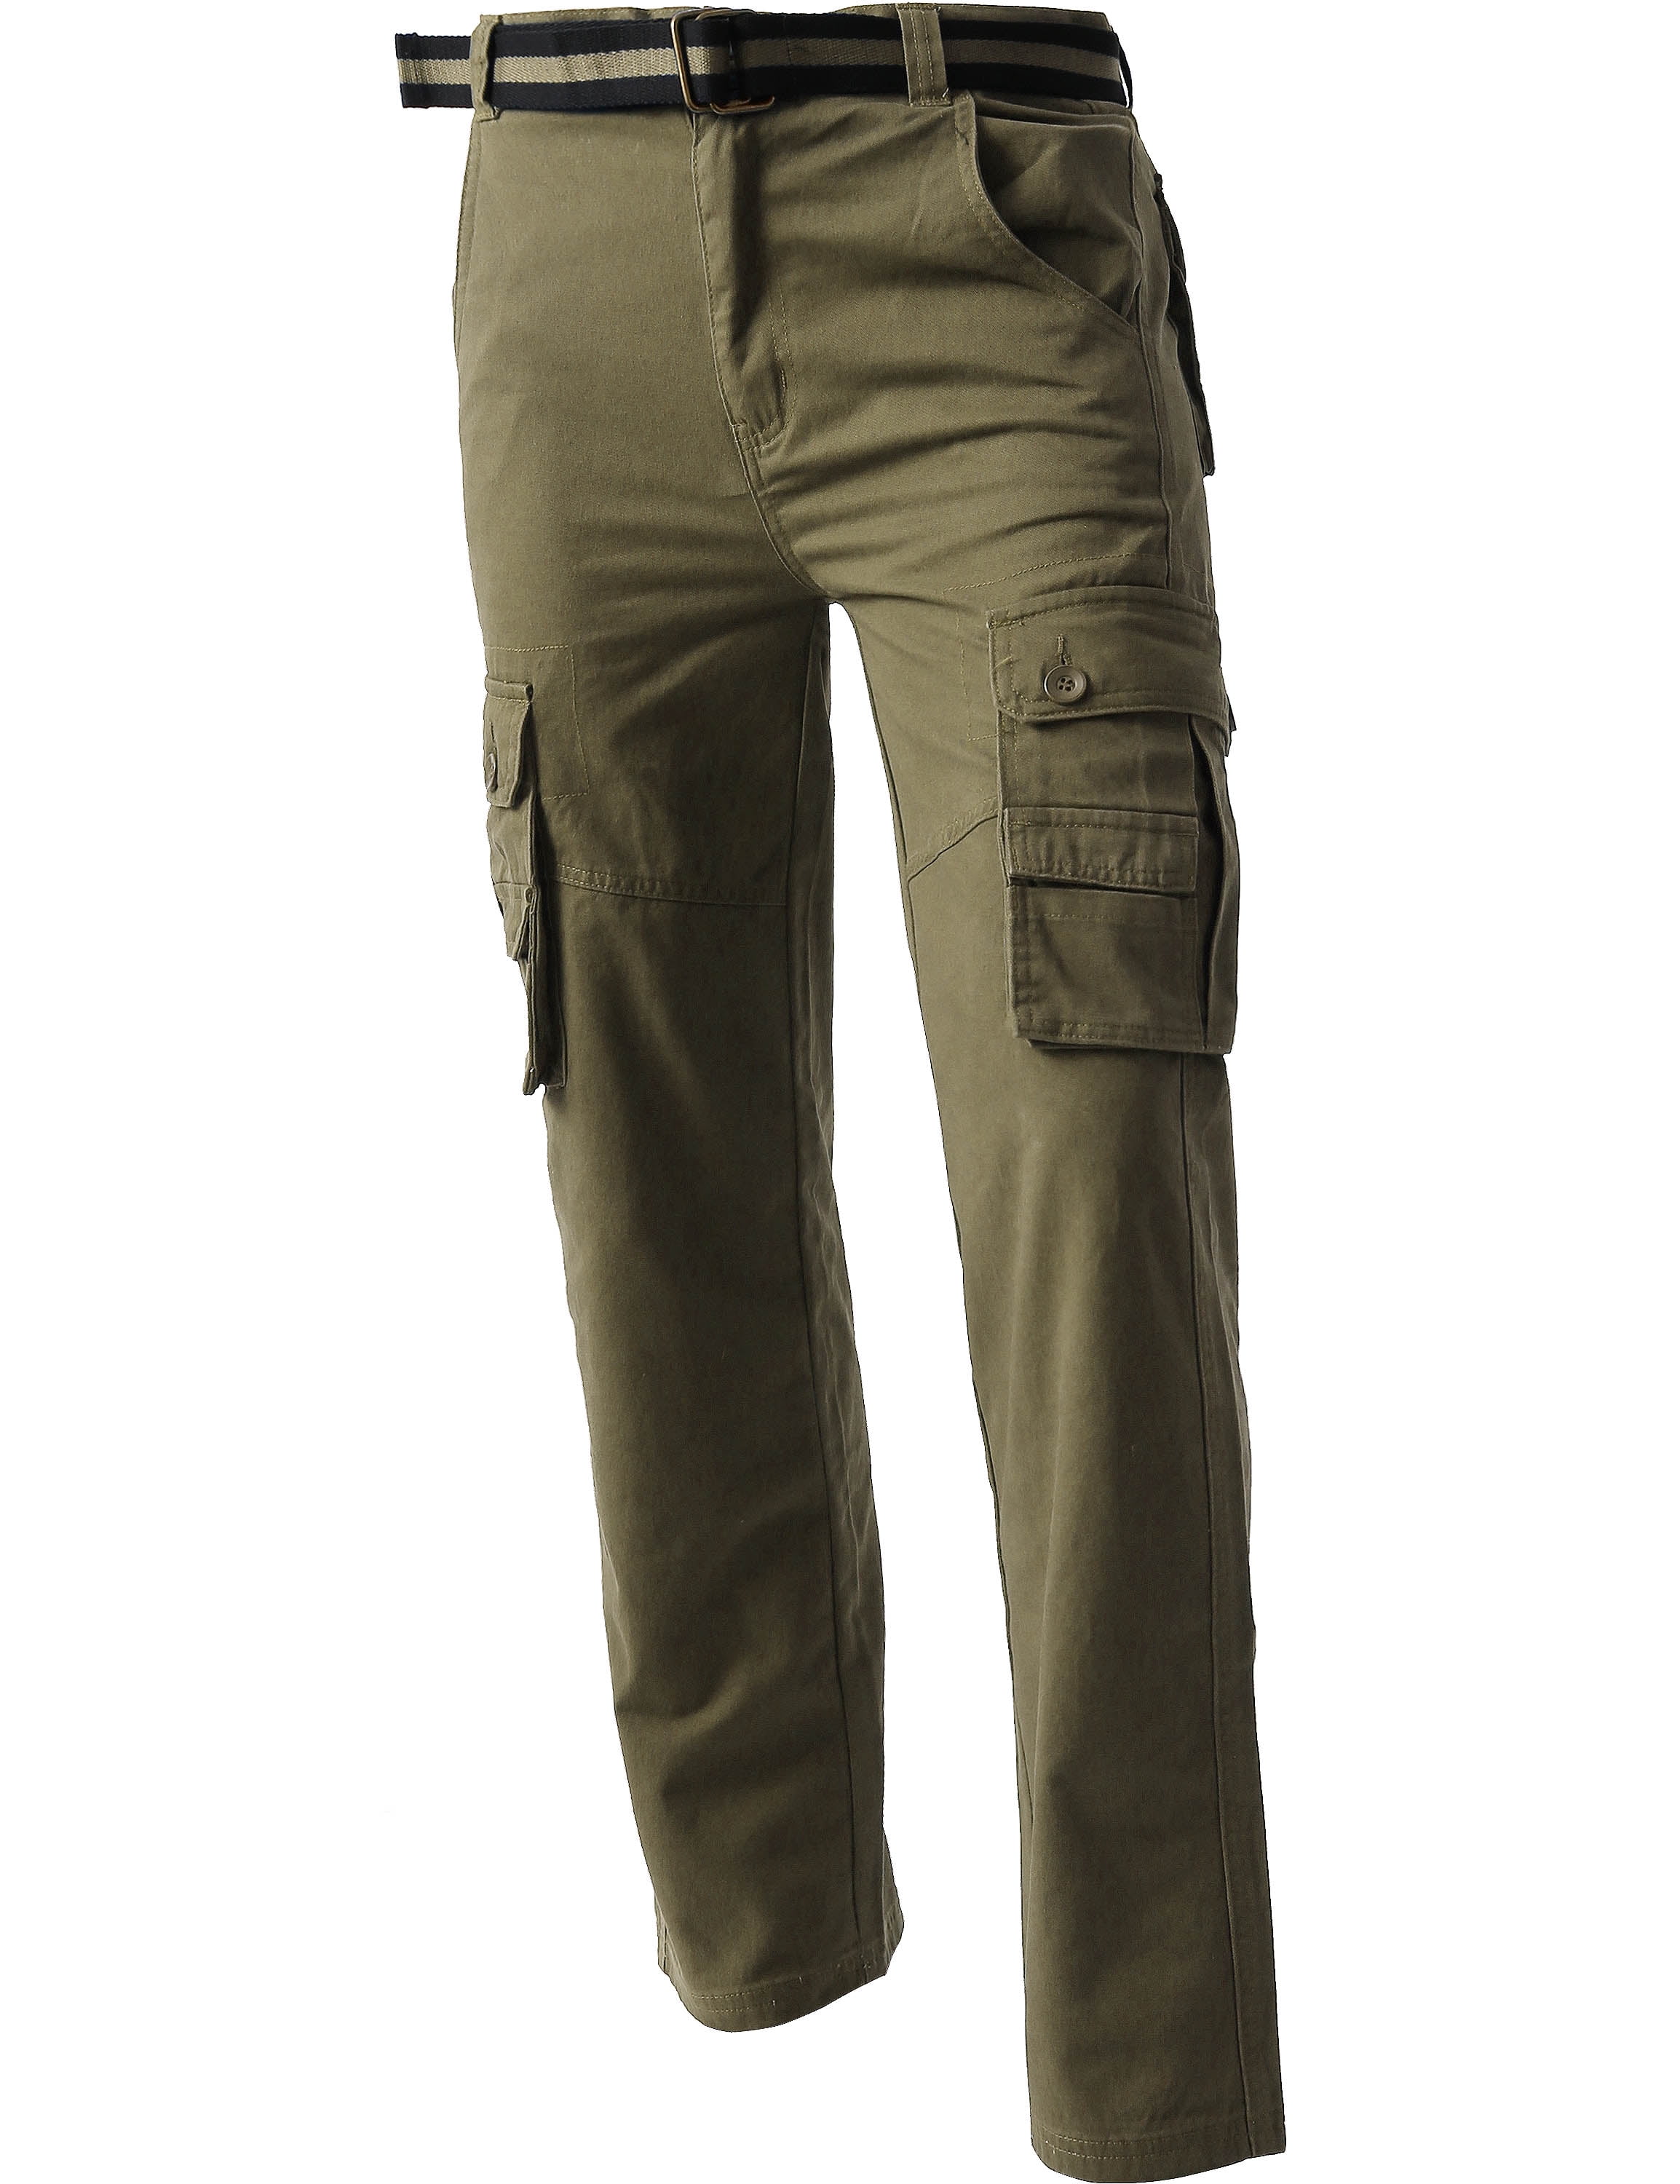 Ma Croix - Ma Croix Mens CARGO PANTS with Utility Belt Lightweight ...